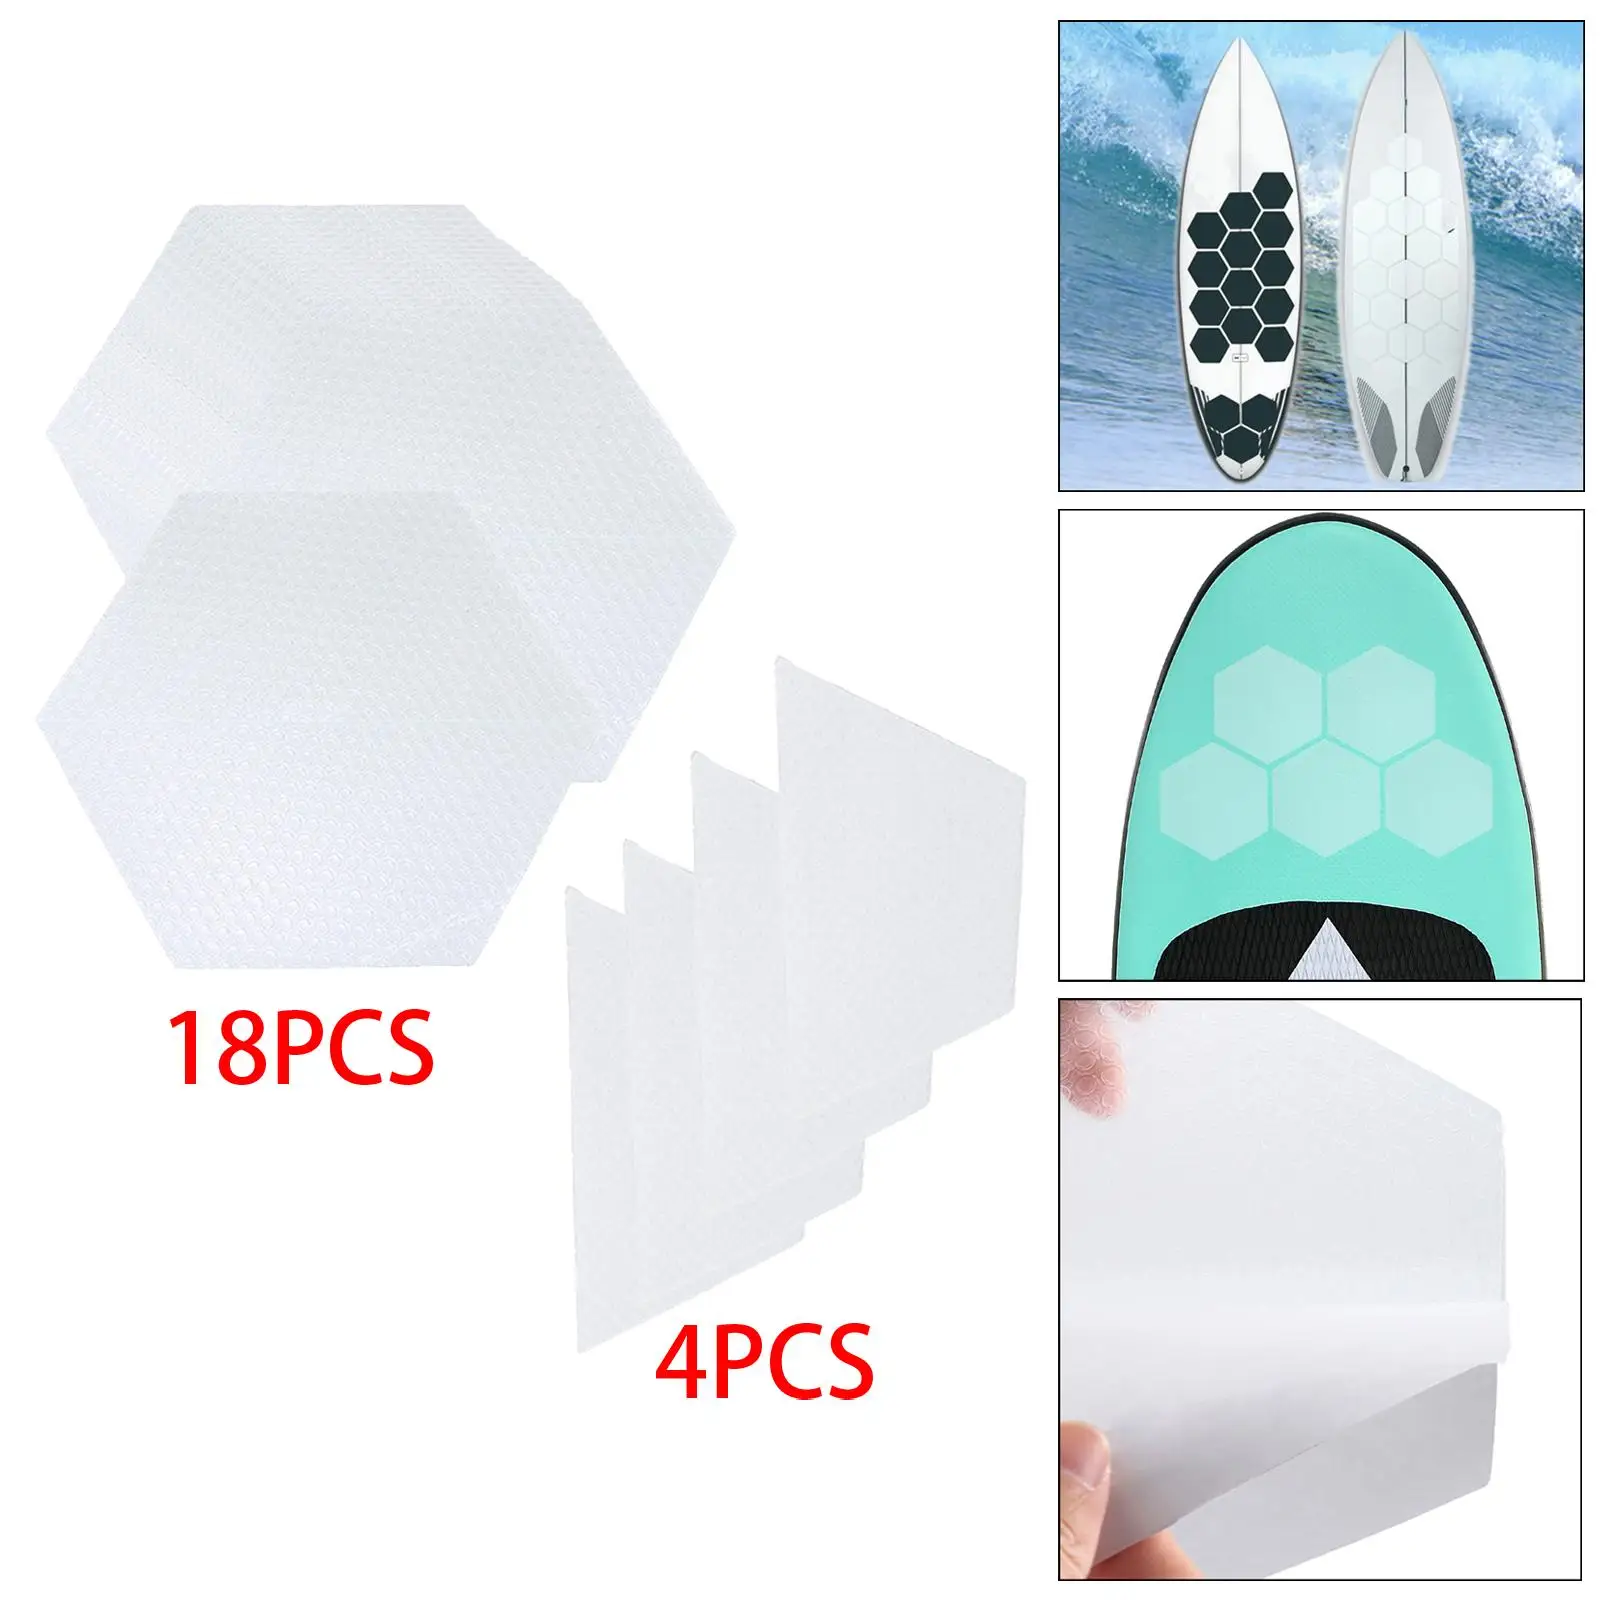 Surfboard Traction Pads Foot Strap Surfpad Non Slip Mat Honeycomb Hole Adhesive Surf Deck Pads Surfing Accessory White